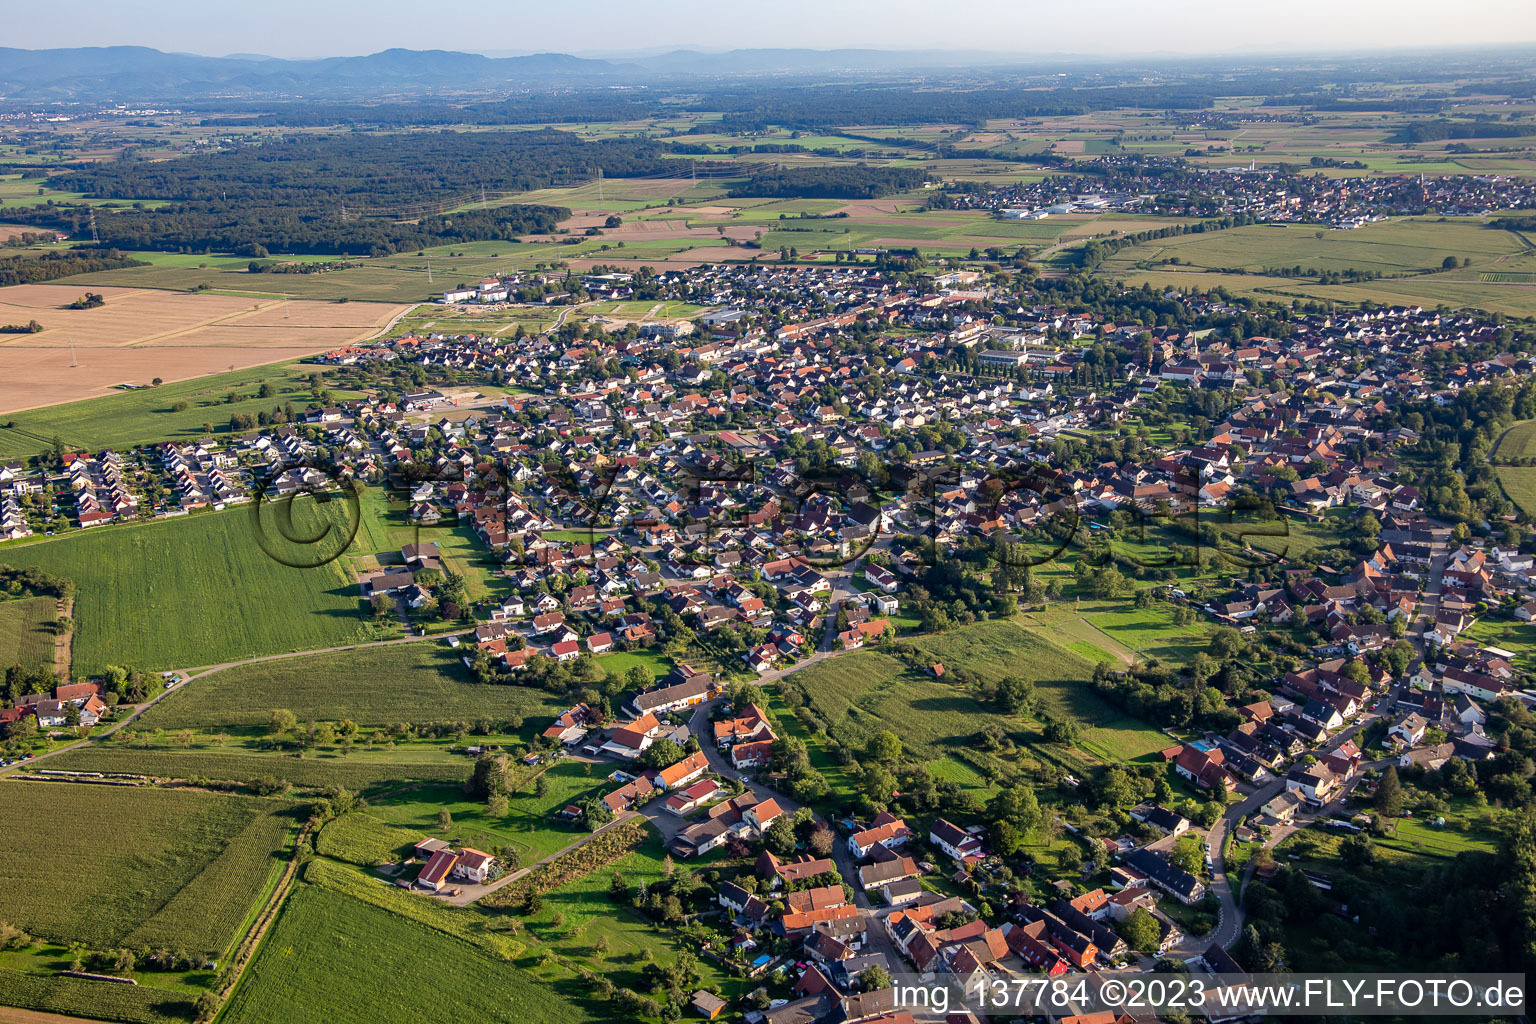 From the north in the district Freistett in Rheinau in the state Baden-Wuerttemberg, Germany